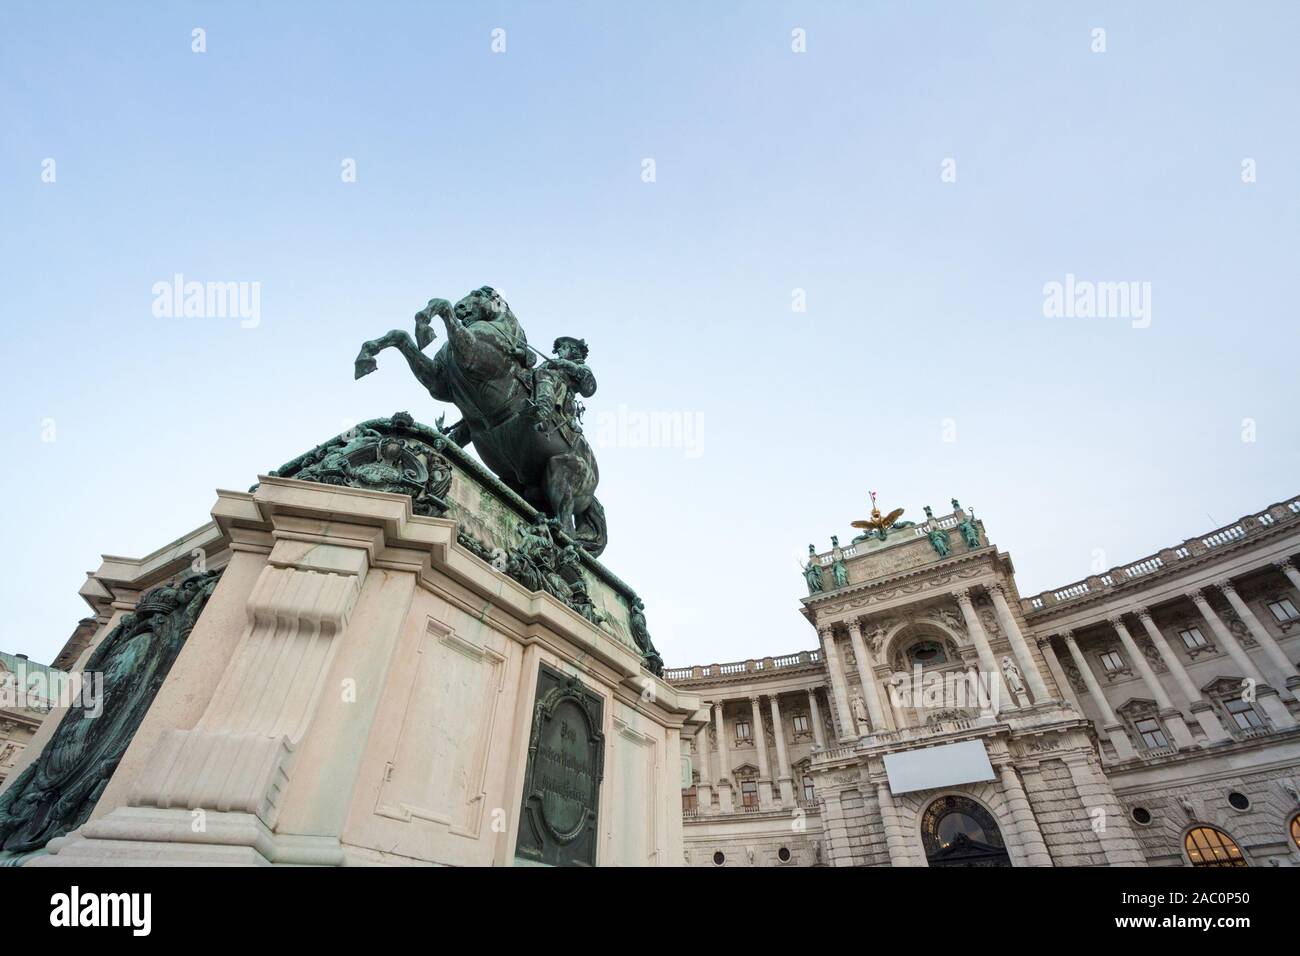 Hofburg palace, on its Neue Burg aisle, taken from the Heldenplatz square, with the 19th century Prinz Eugen statue in front in Vienna, Austria. It is Stock Photo